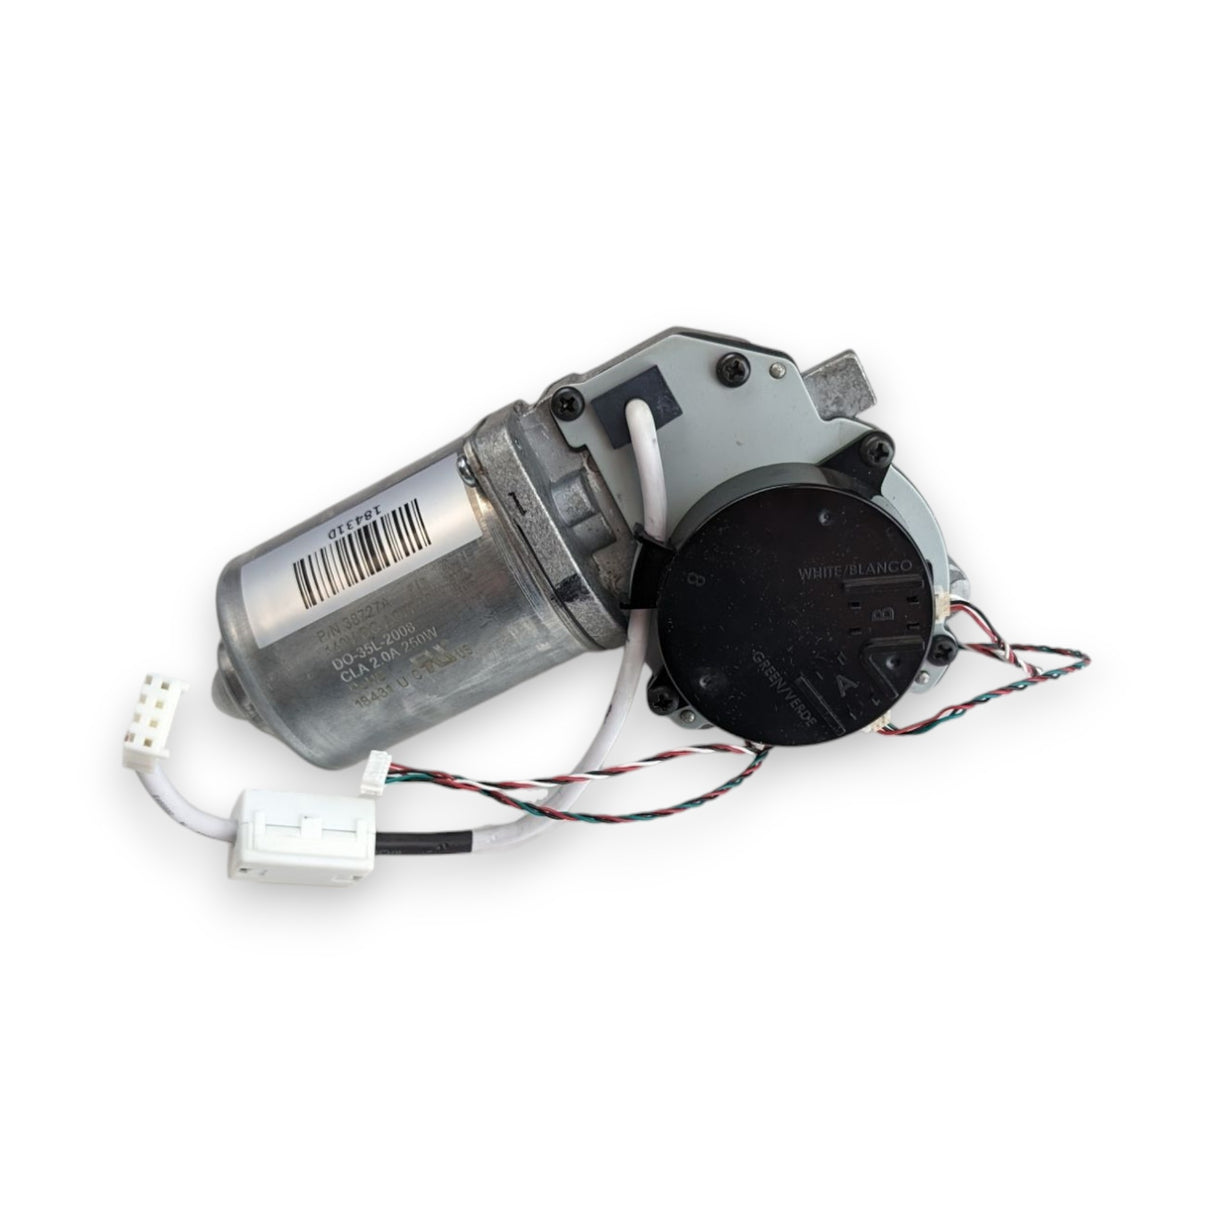 140V DC Motor with wiring harness for motor and encoder